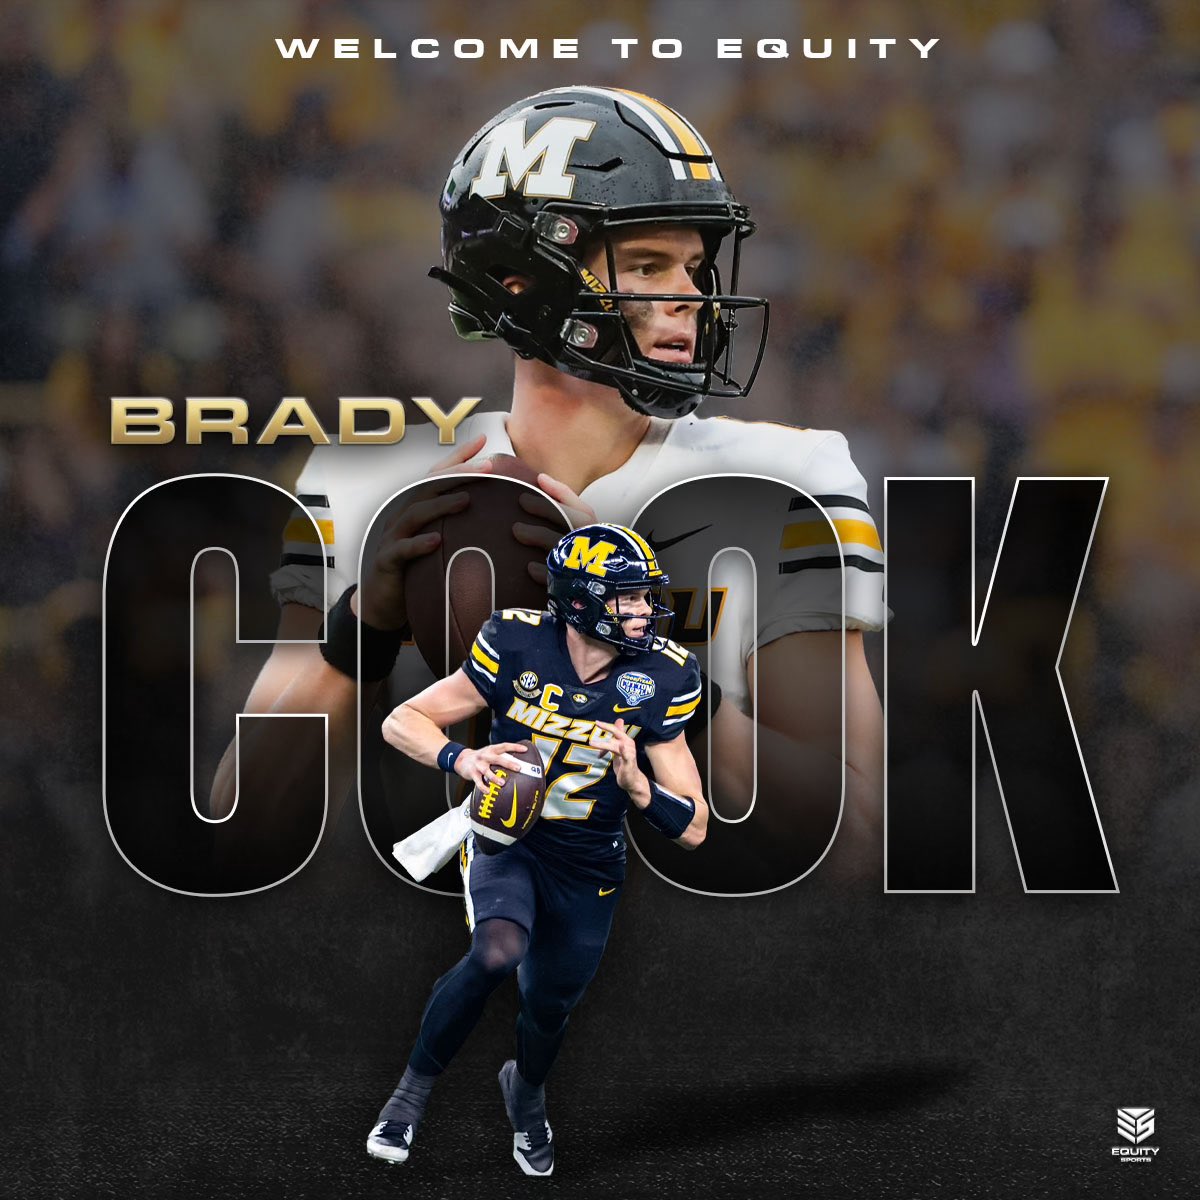 Excited to welcome @qbcook12 to the Equity family for NIL representation ✍️🔥